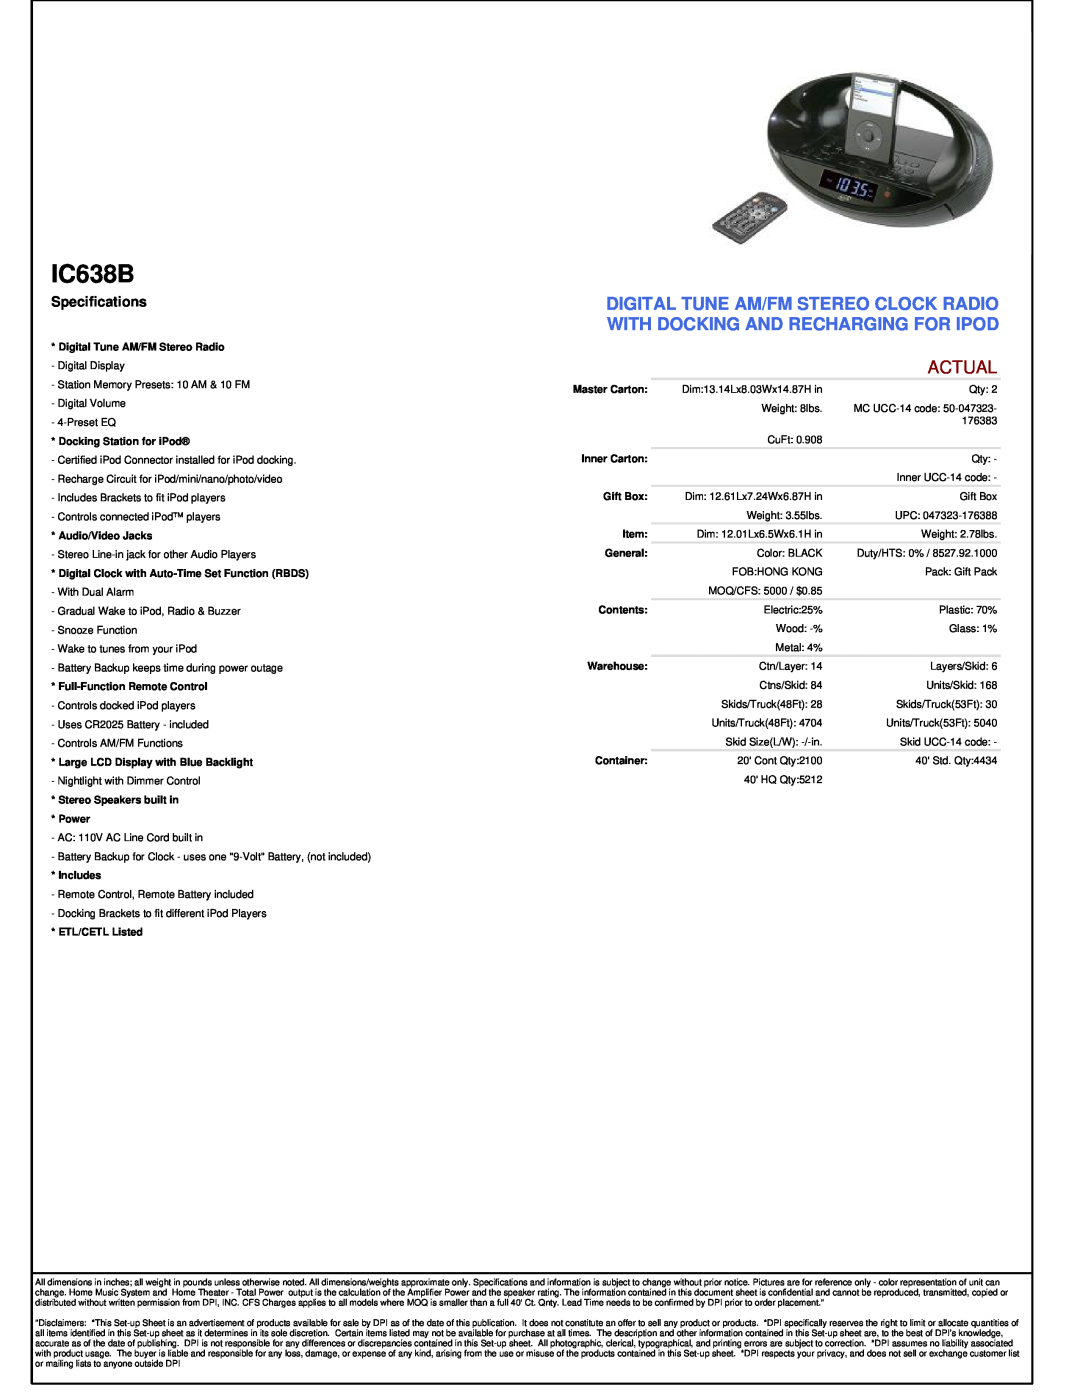 iLive ic638B manual IC638B, Actual, Specifications 